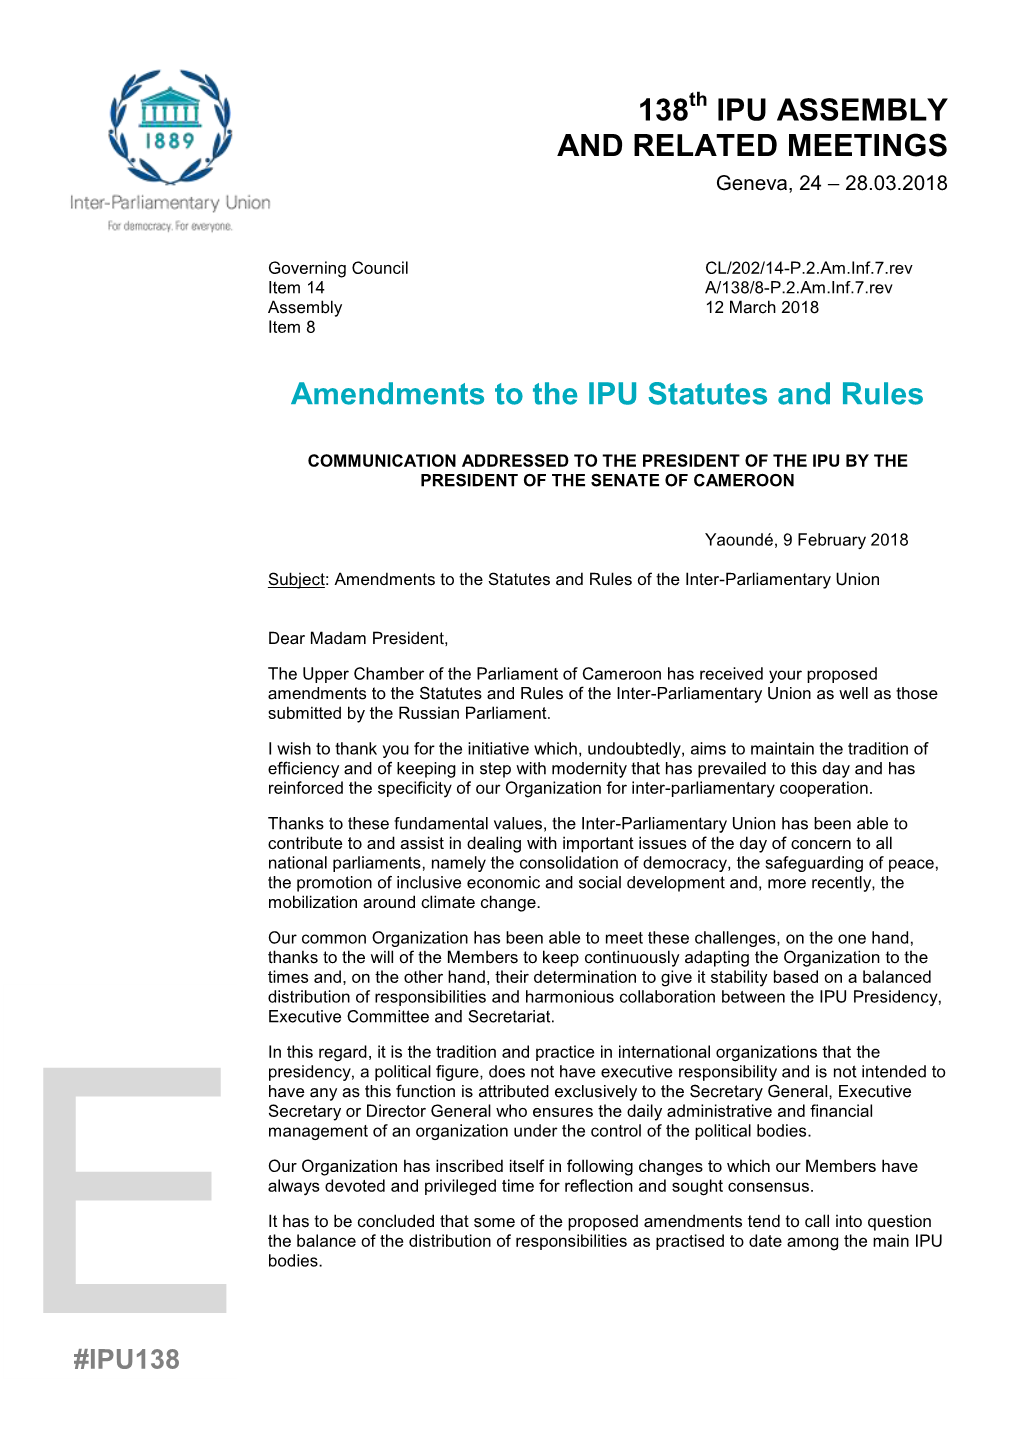 138 IPU ASSEMBLY and RELATED MEETINGS Amendments to the IPU